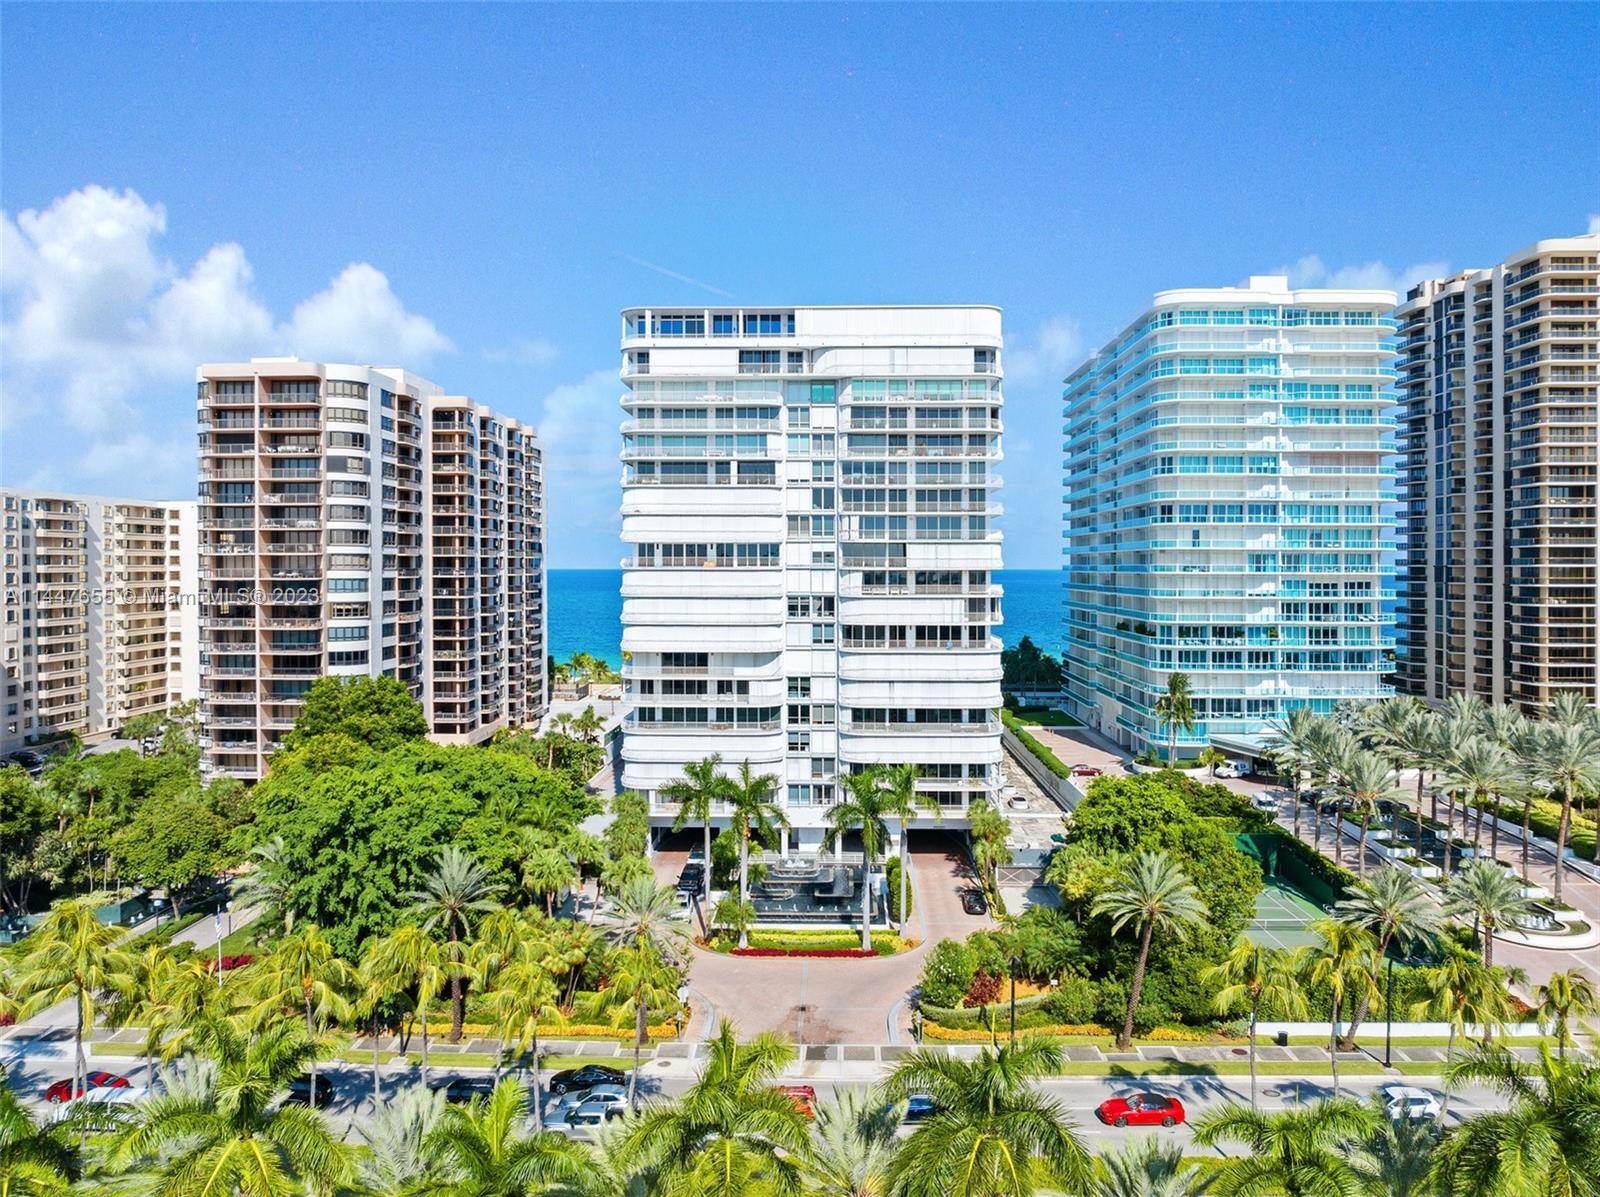 This stunning 2550 sqft apt in Bal Harbour is a true gem. It features 2 spacious bedrooms each with 